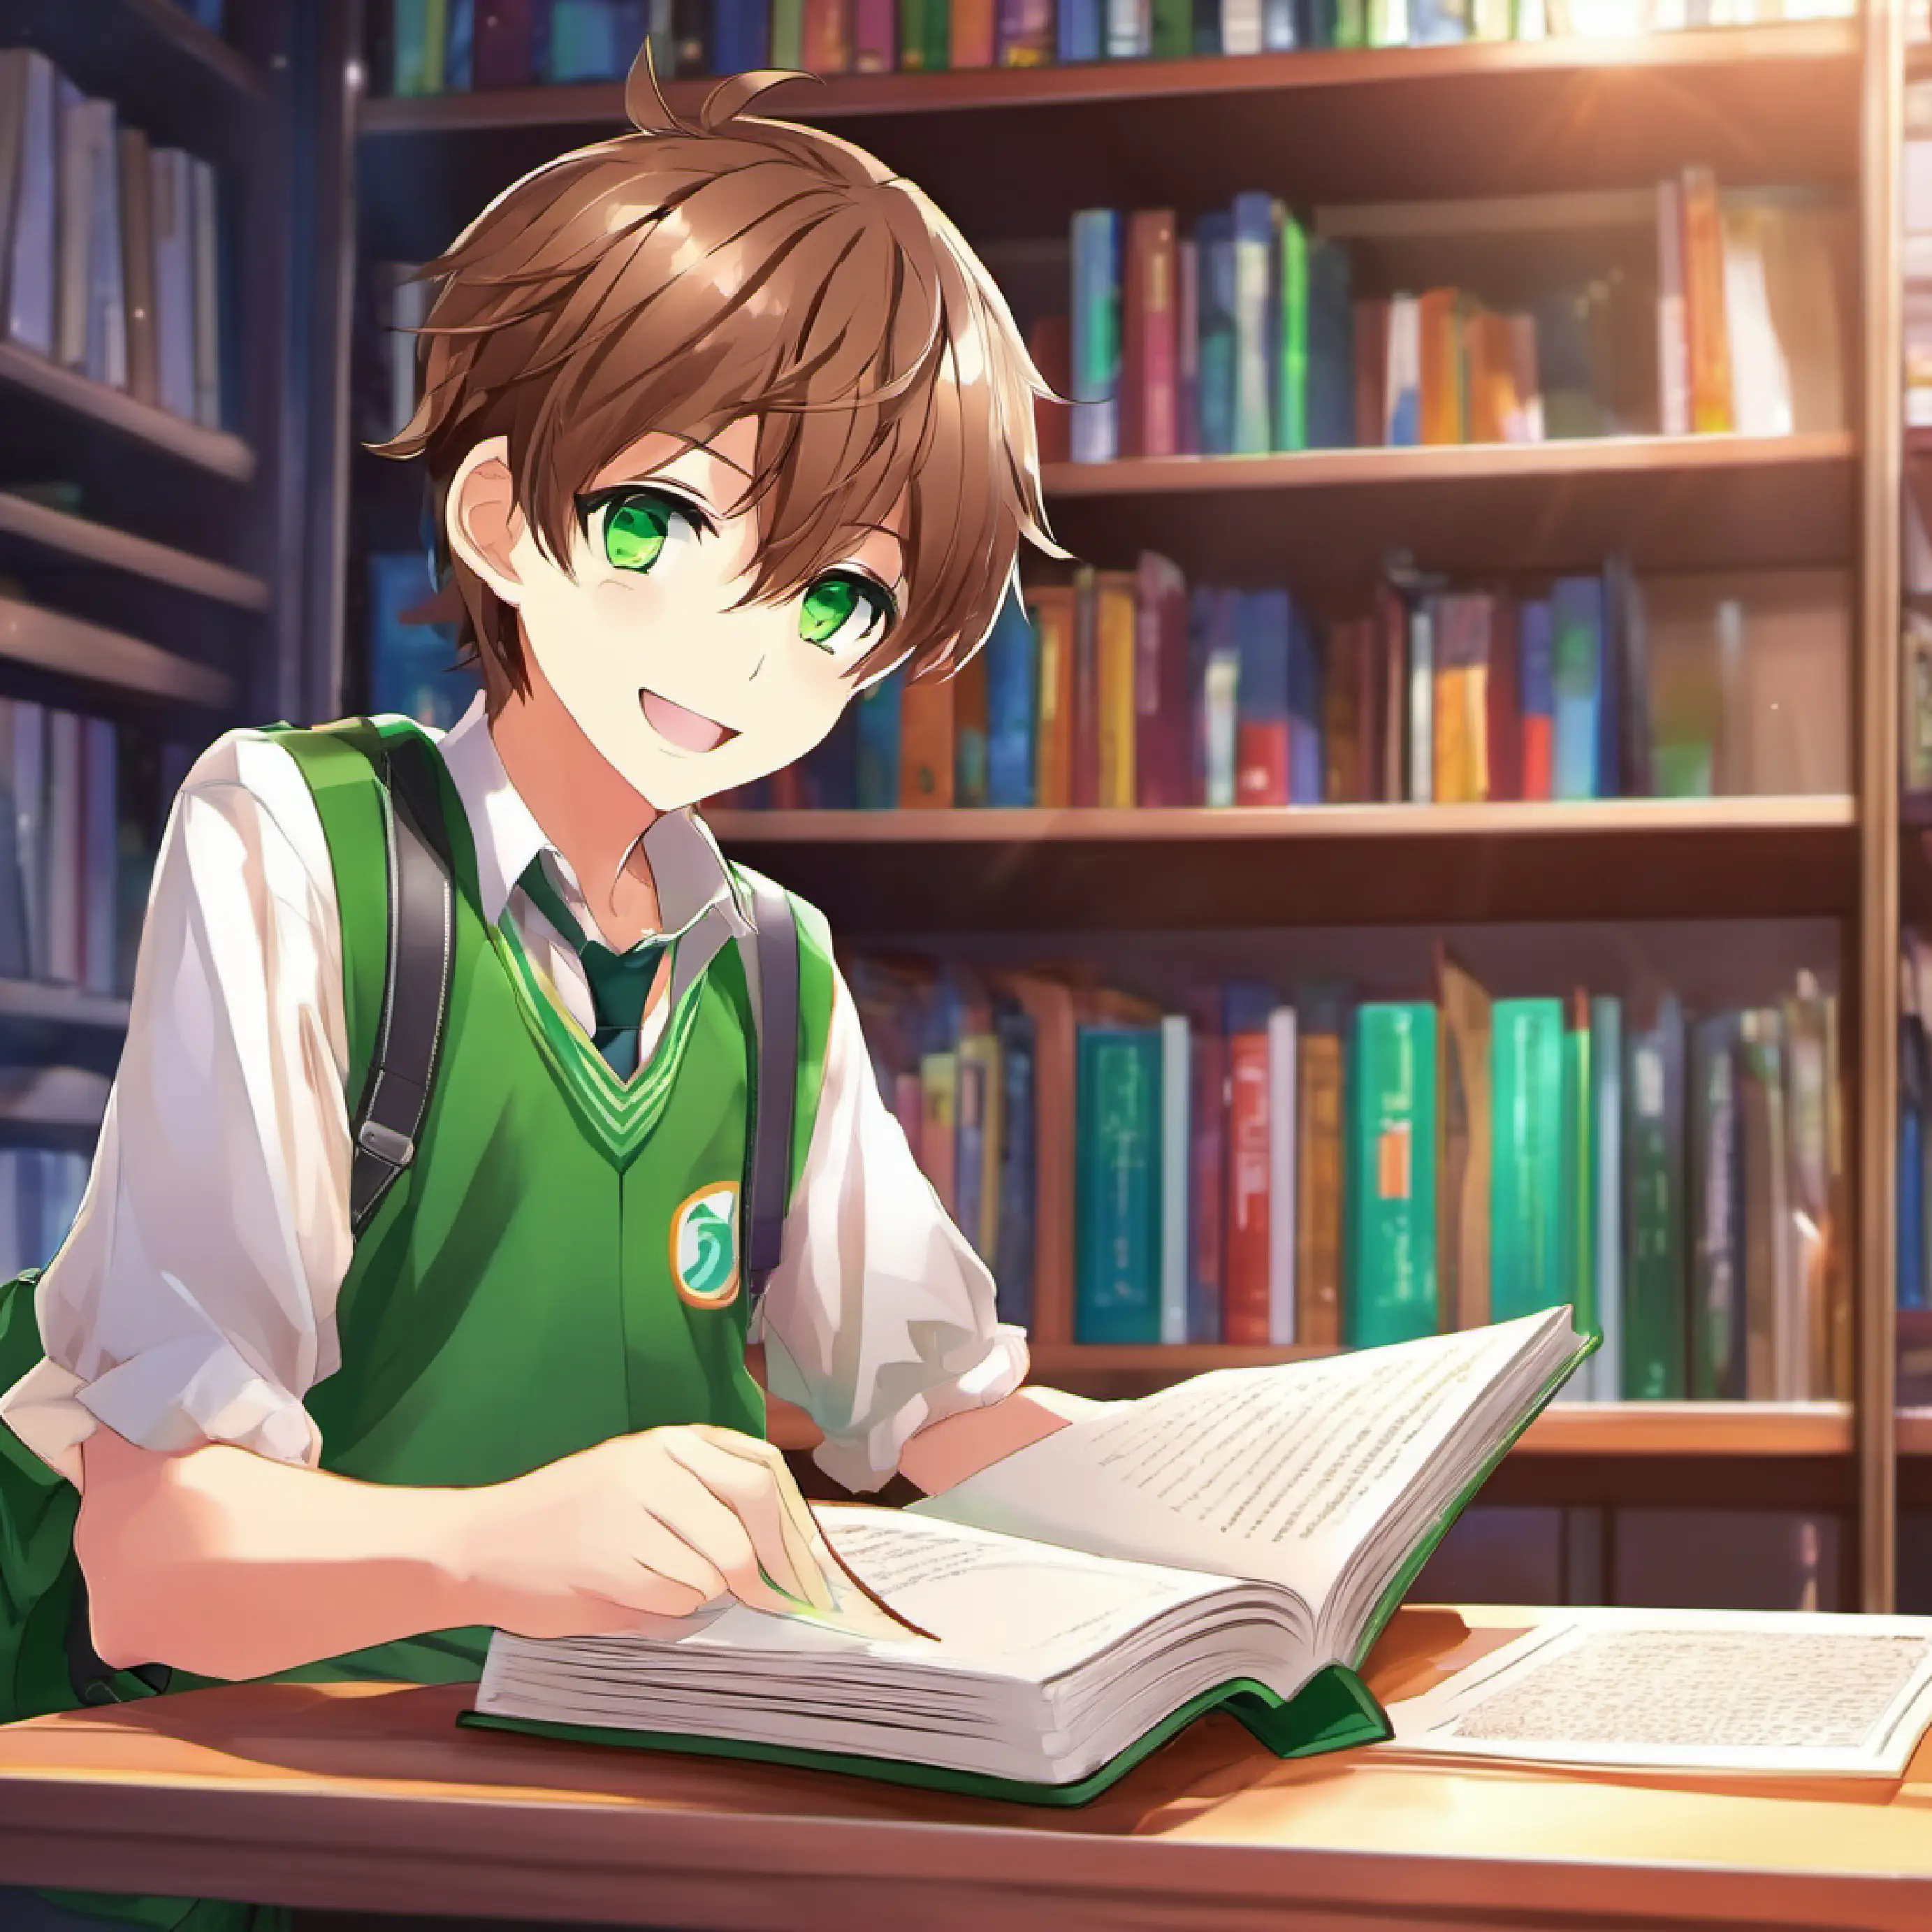 Classroom, reading time, Energetic boy, brown hair, green eyes, always smiling with a book